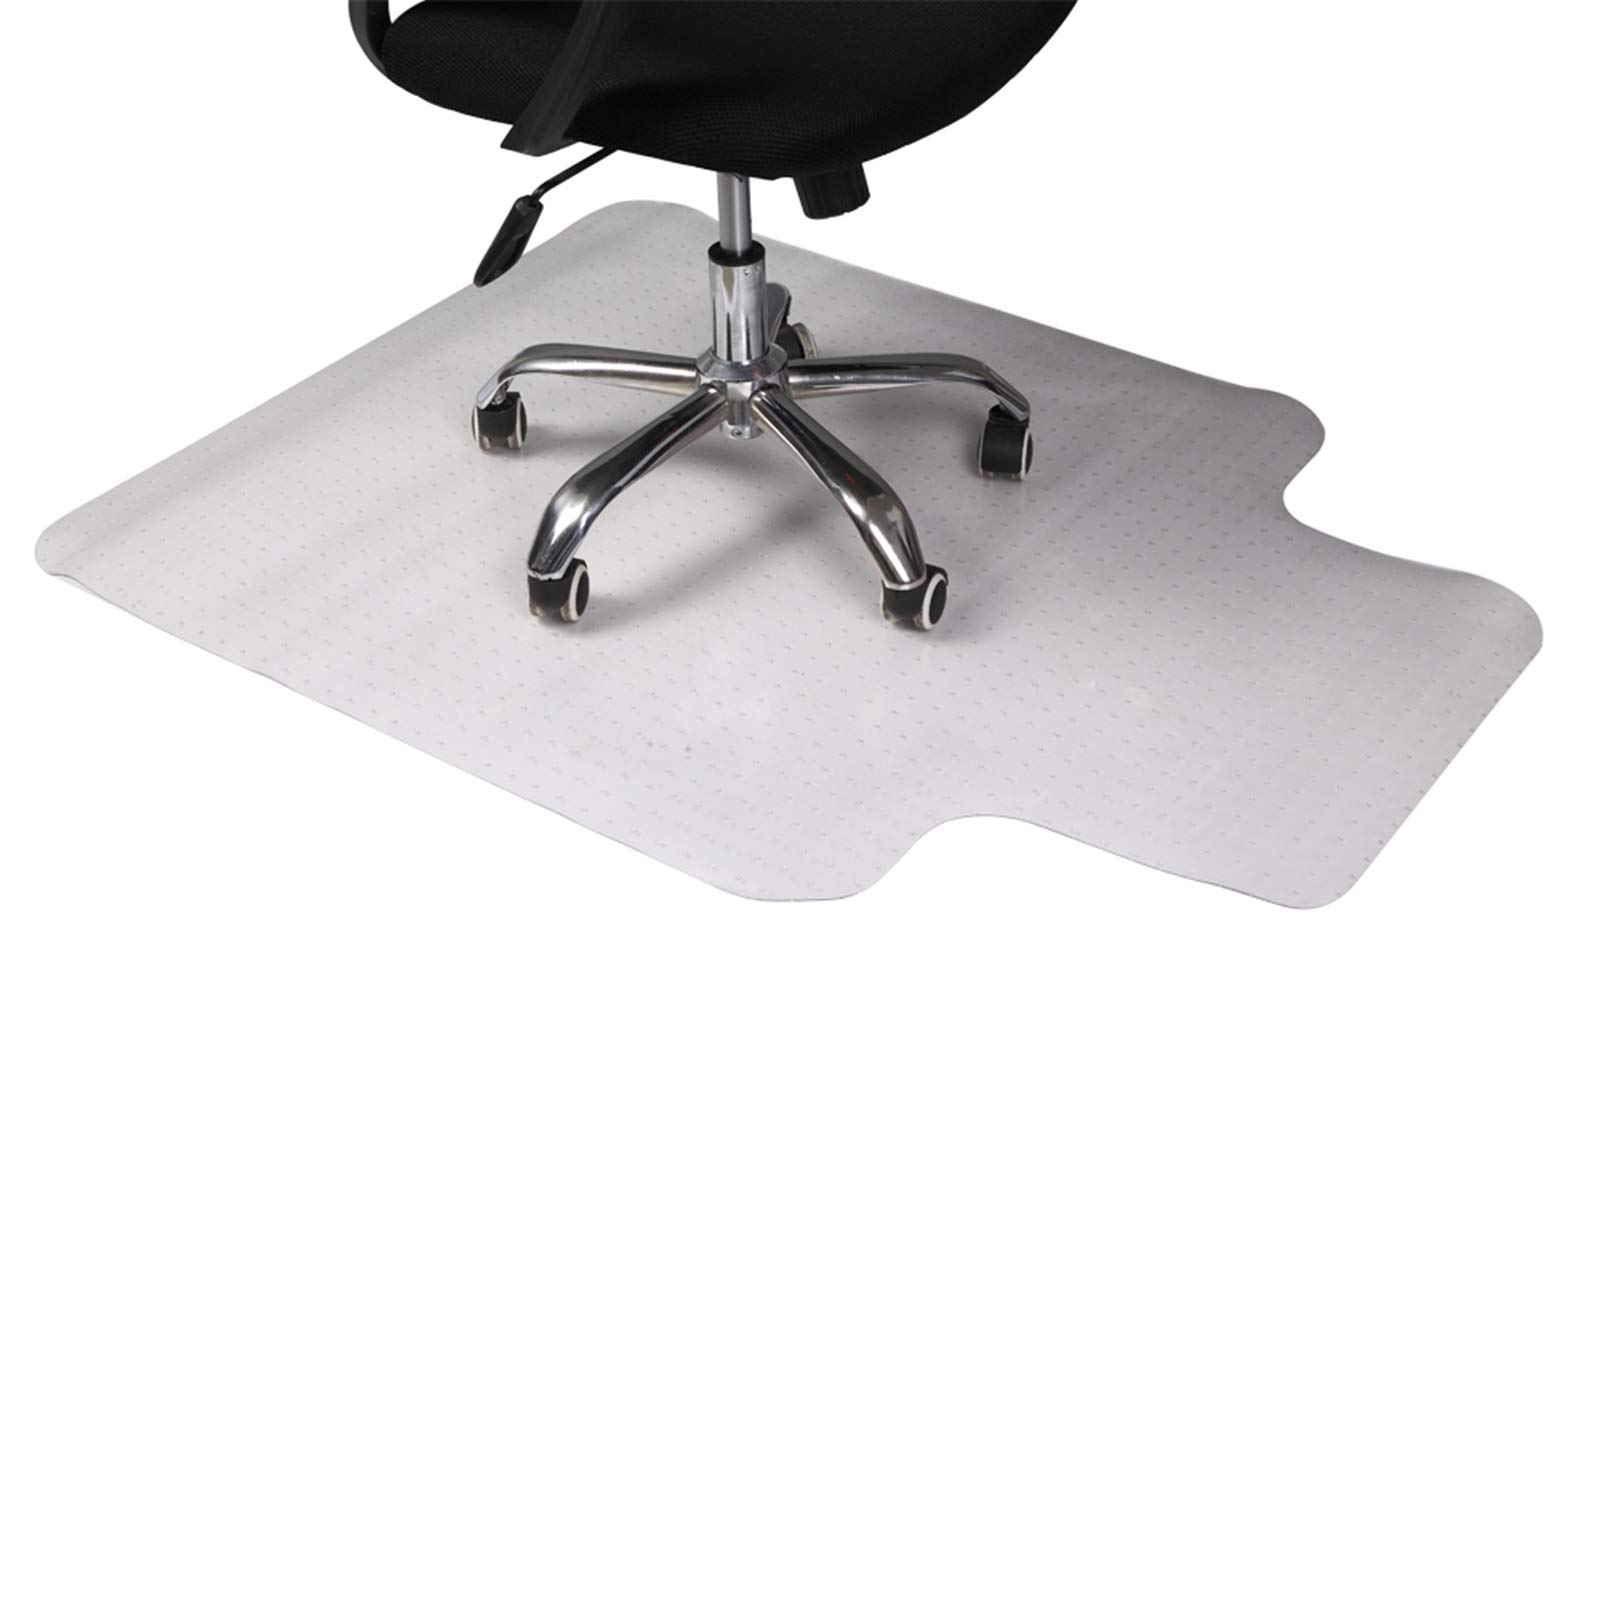 Transparent PVC Office Chair Mat for Carpet – Computer Chair Mat for Carpeted Floors – Easy Glide Rolling Plastic Floor Mat for Office Chair on Carpet for Work, with Extended Lip (47.24 x 35.43 )".